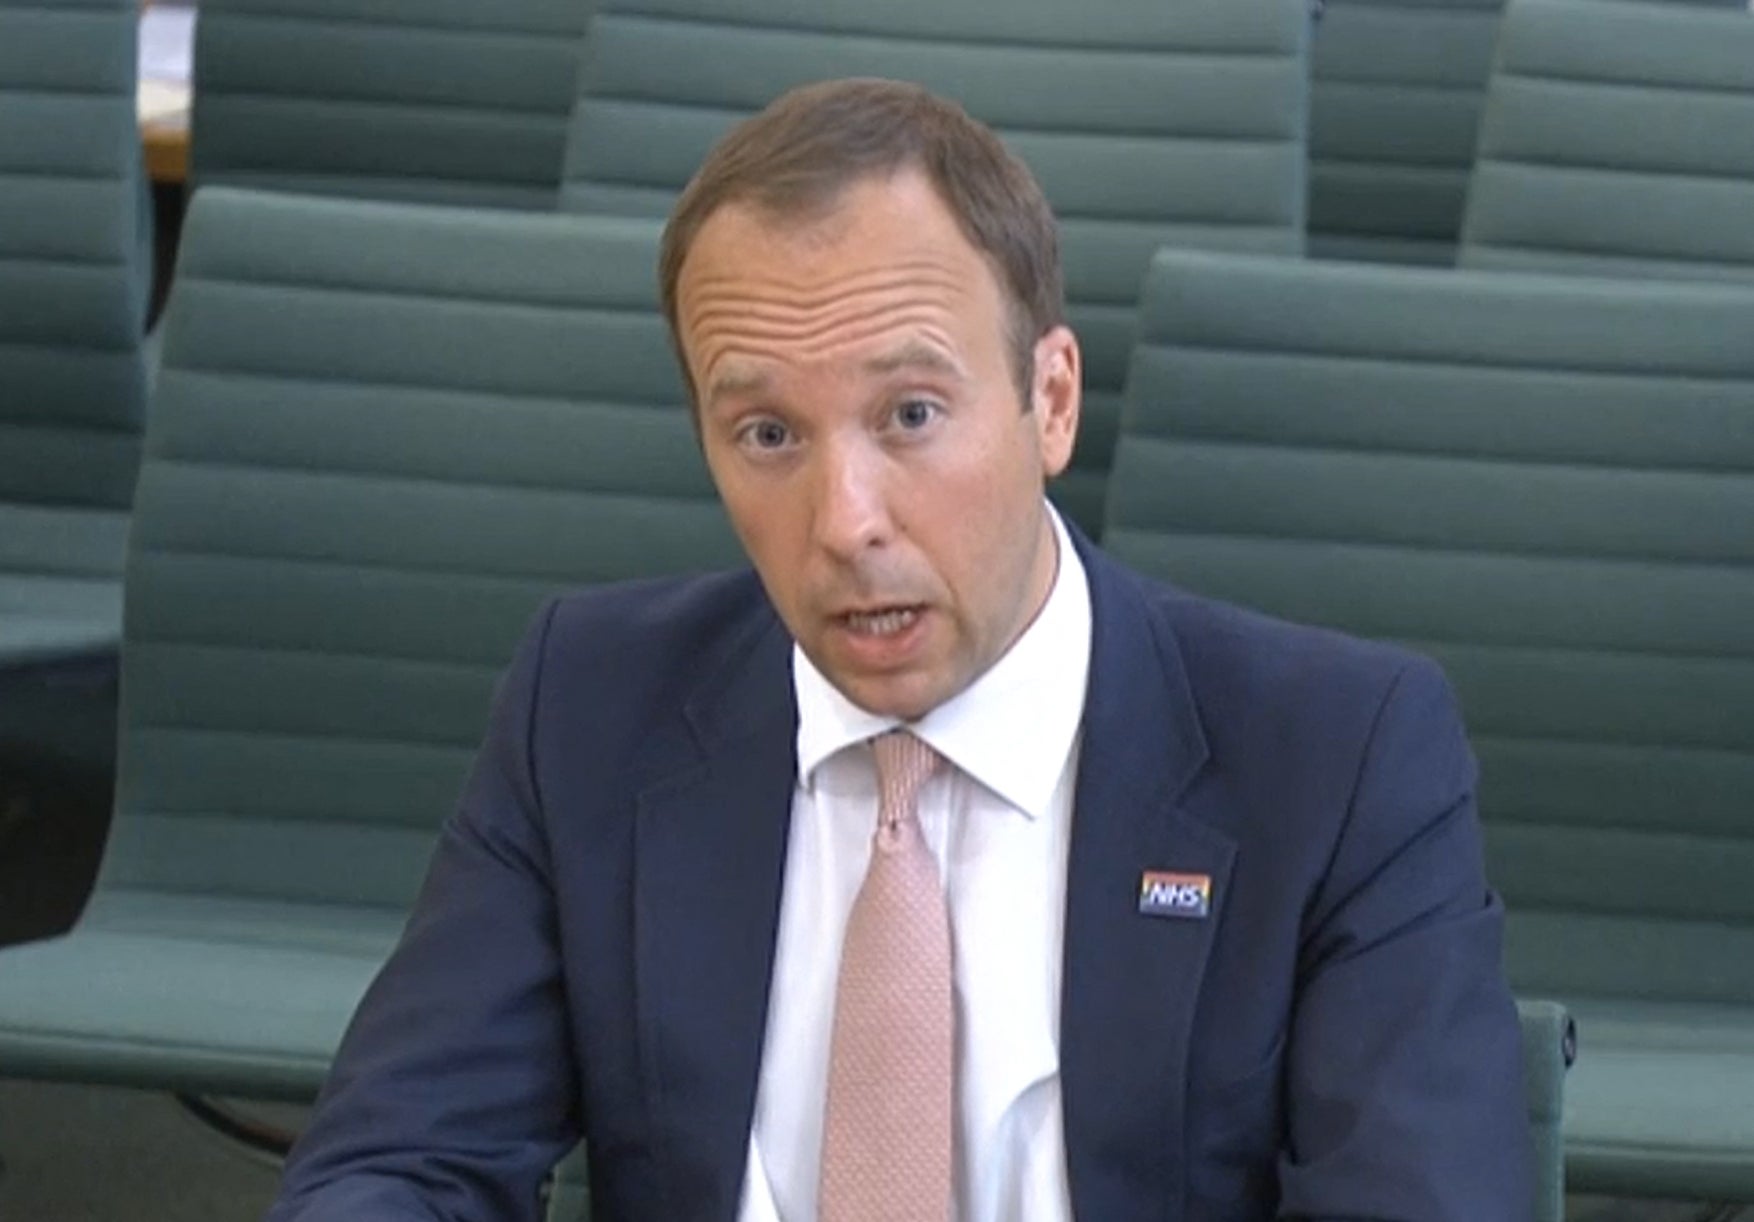 Health secretary Matt Hancock has been criticised for making untrue claims during his appearance before MPs on Thursday